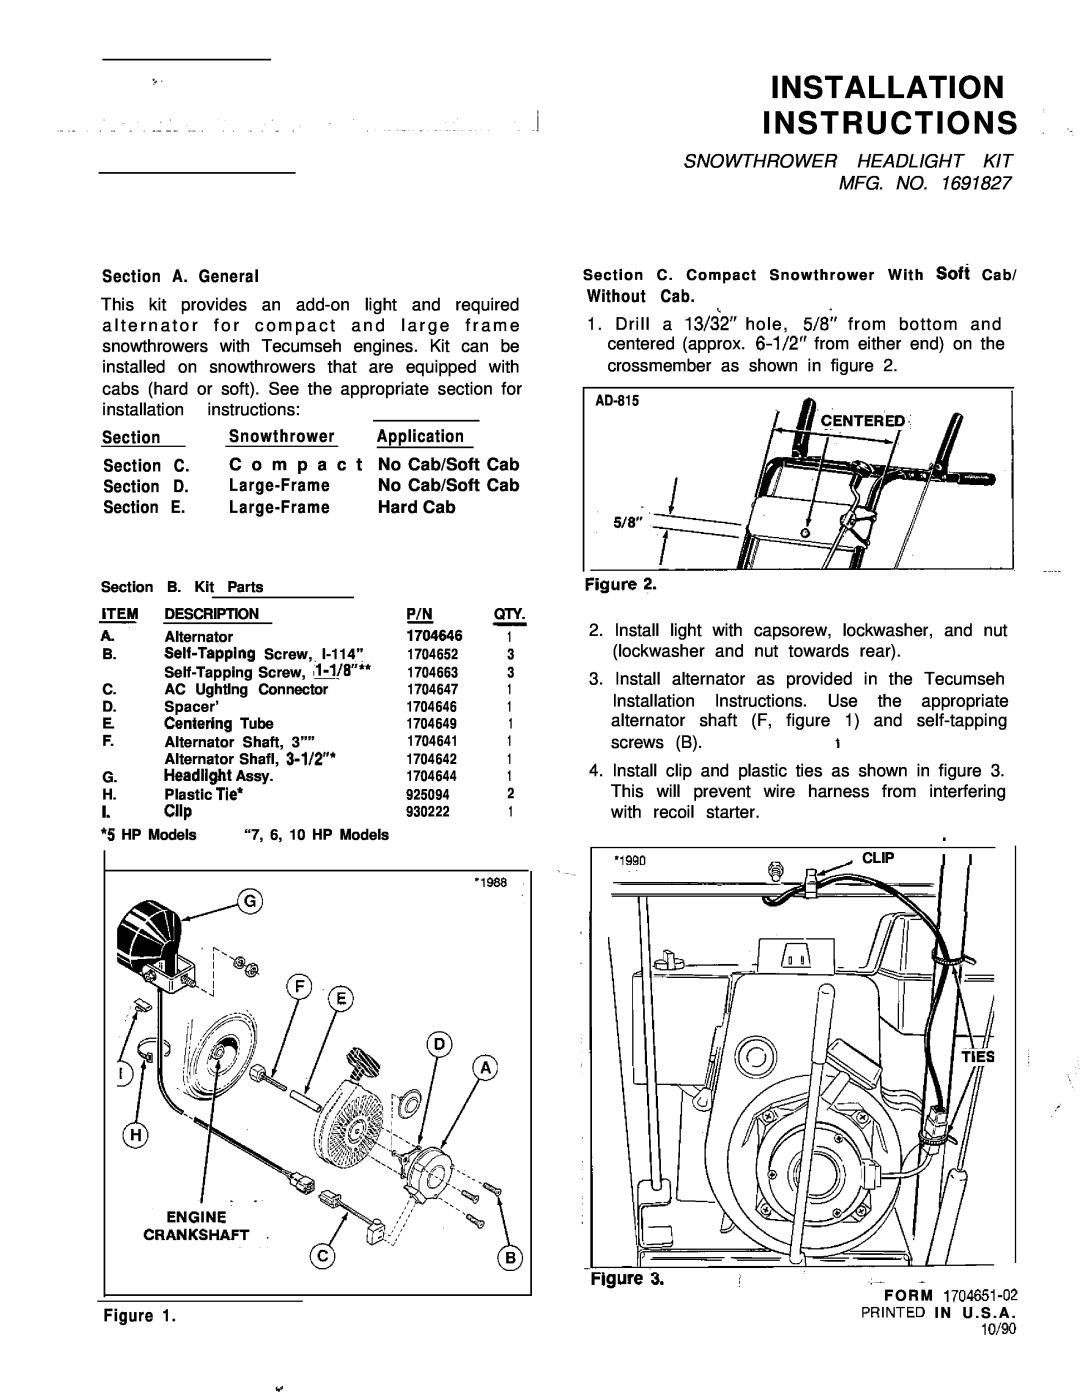 Snapper 1691827 installation instructions Section A. General, Section Snowthrower Application, Without Cab, ‘1990, gure 